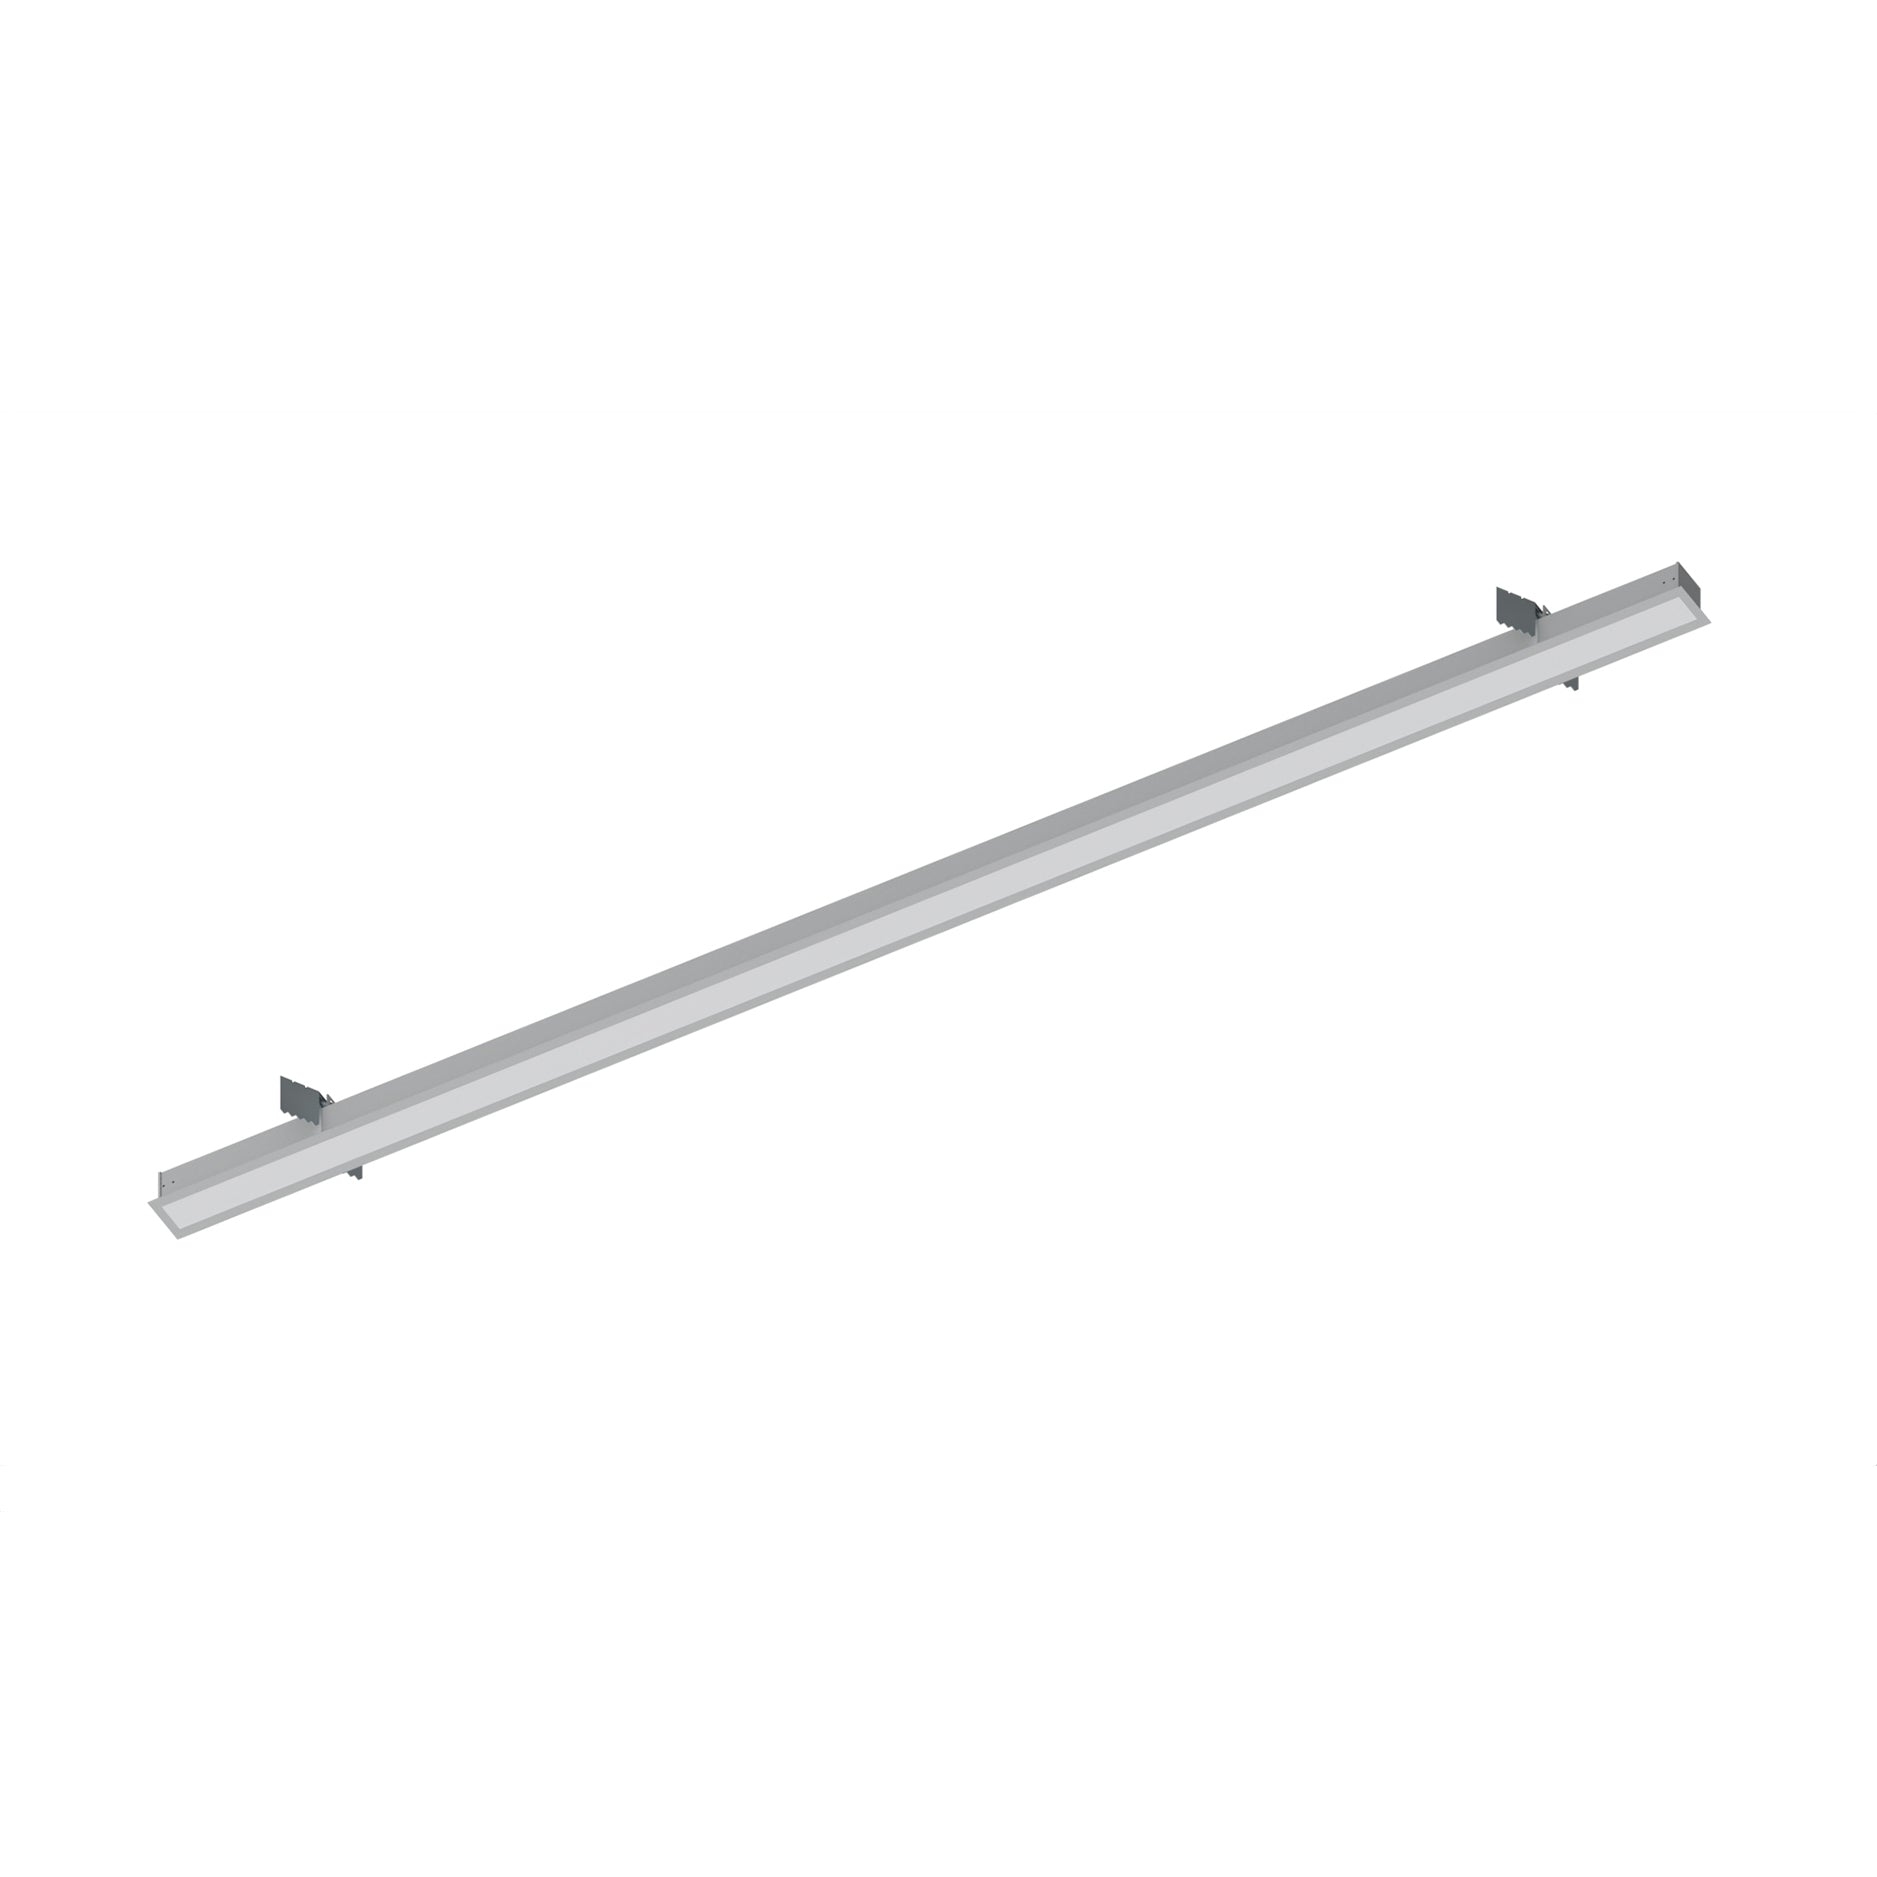 Nora Lighting NRLIN-81030A - Linear - 8' L-Line LED Recessed Linear, 8400lm / 3000K, Aluminum Finish